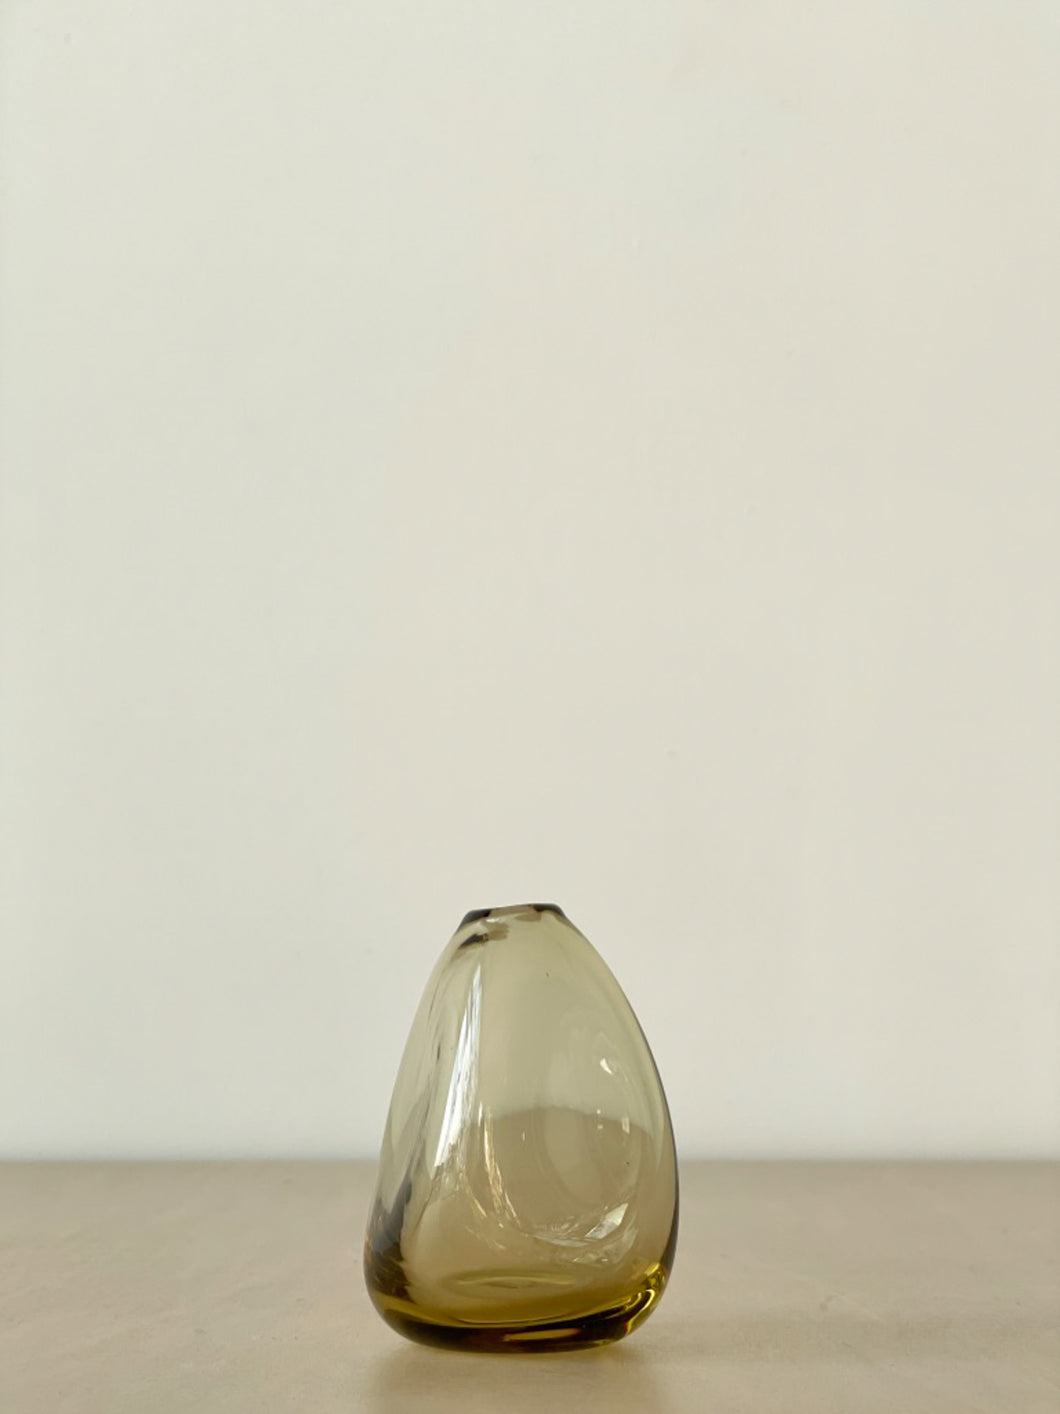 Tall Triangle Glass Vase in Tan